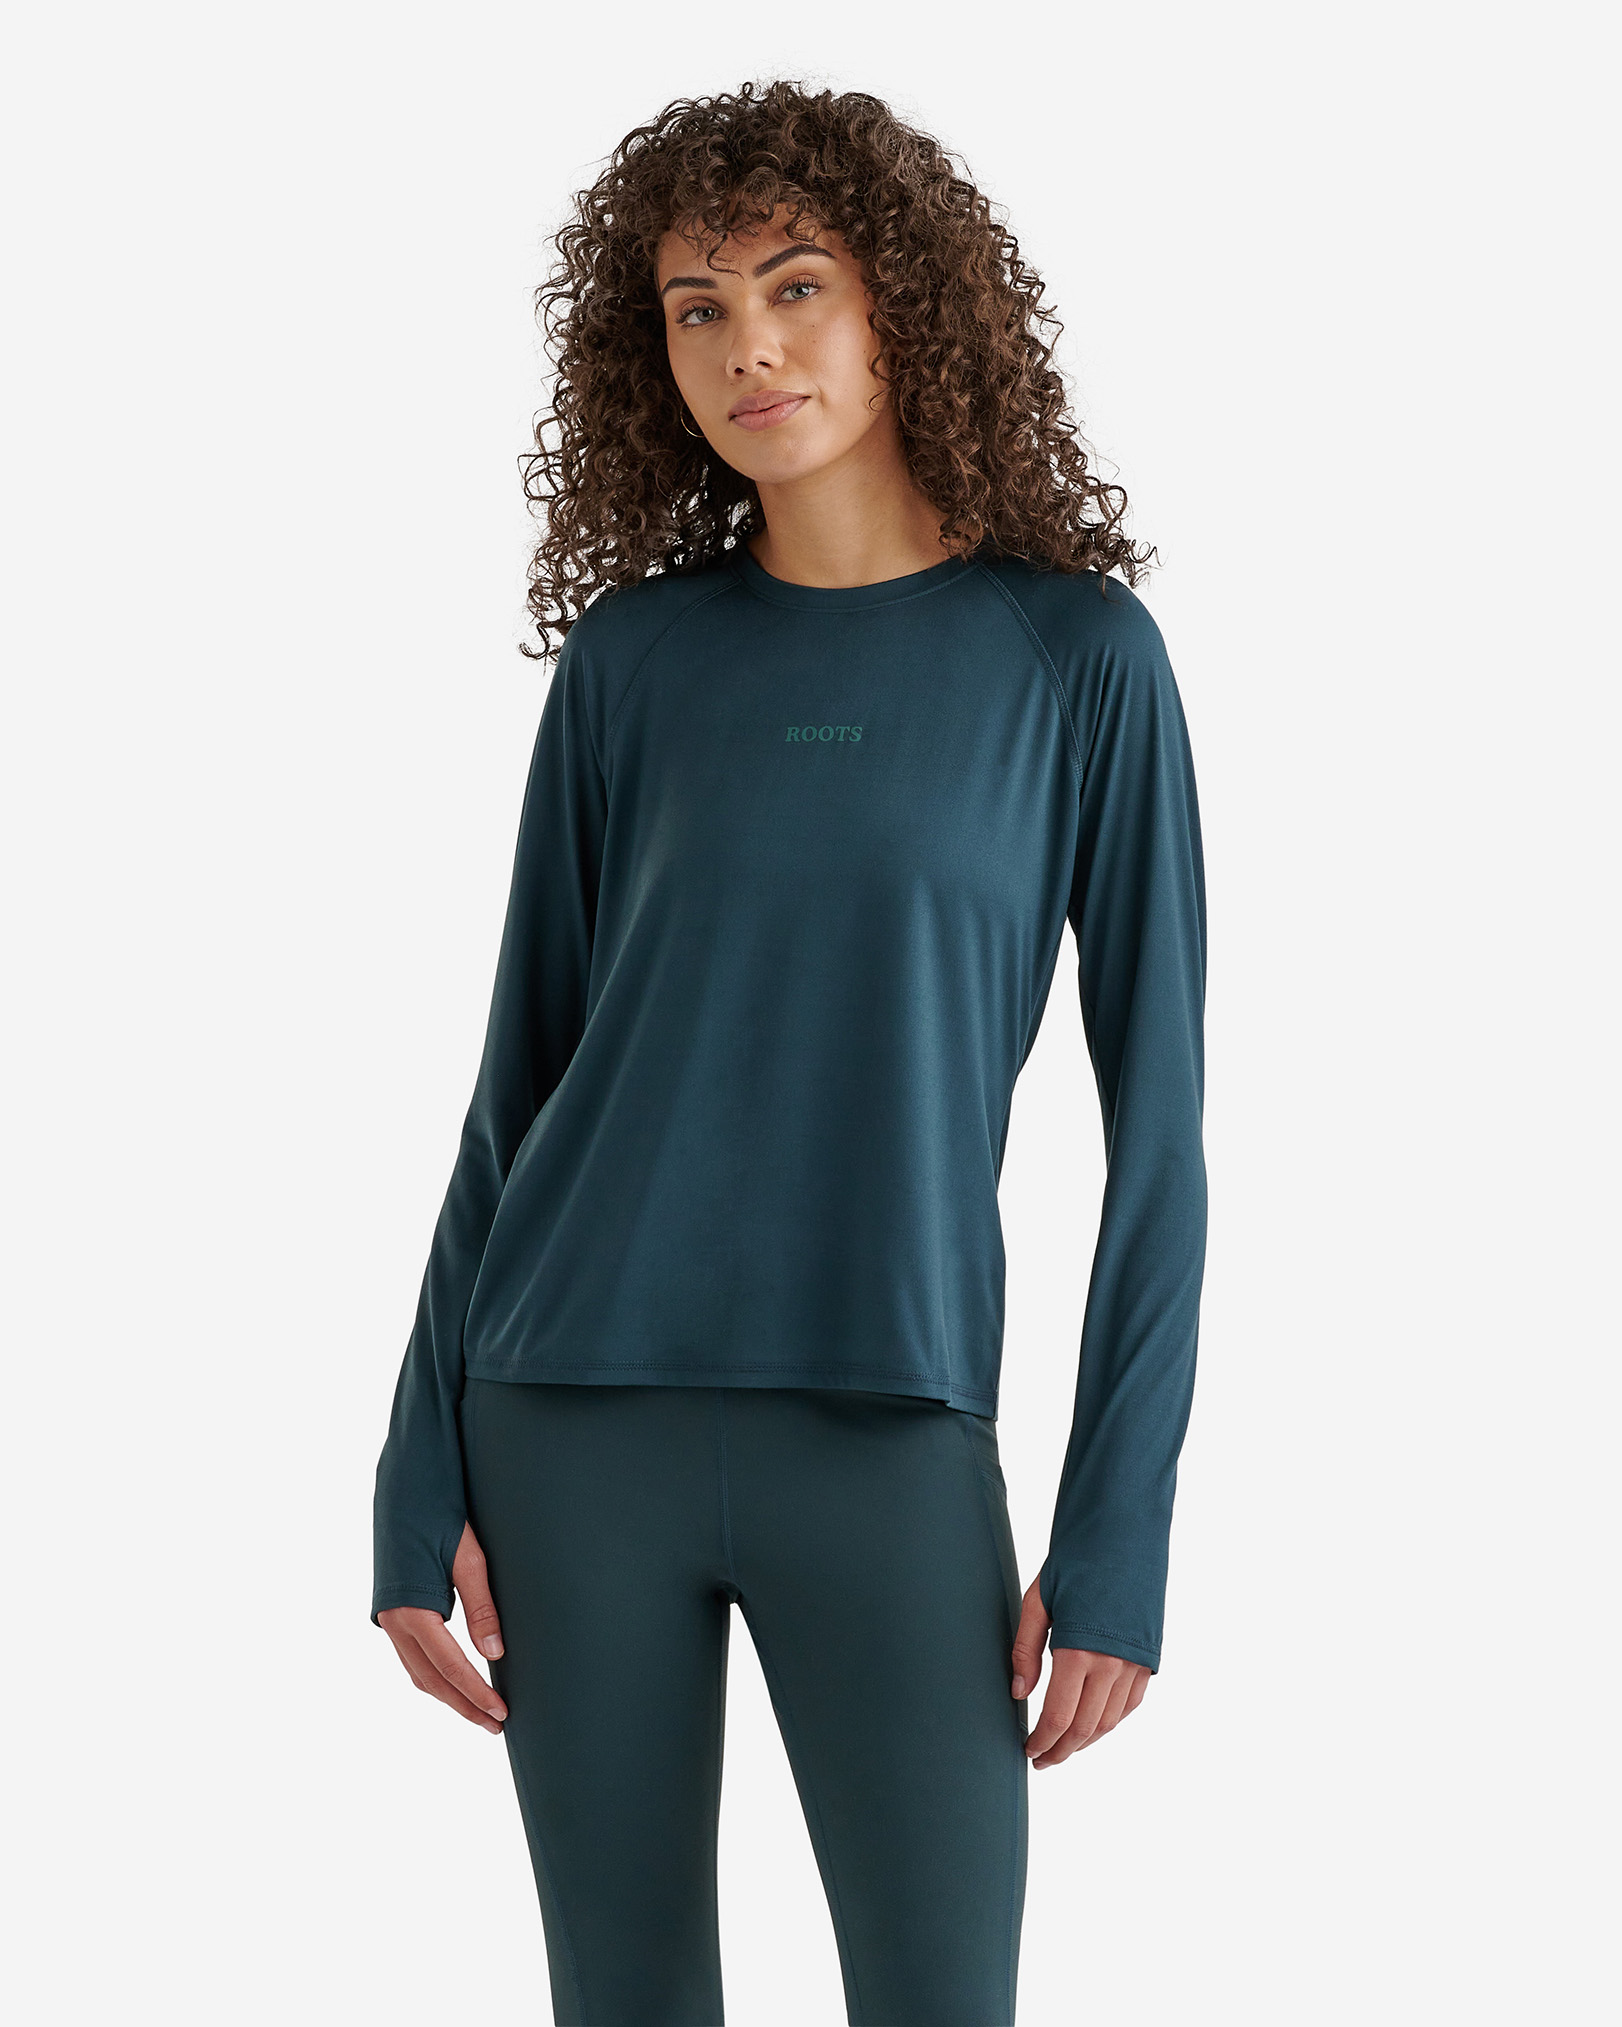 Roots Practice Peace Renew Long Sleeve Top in Forest Teal